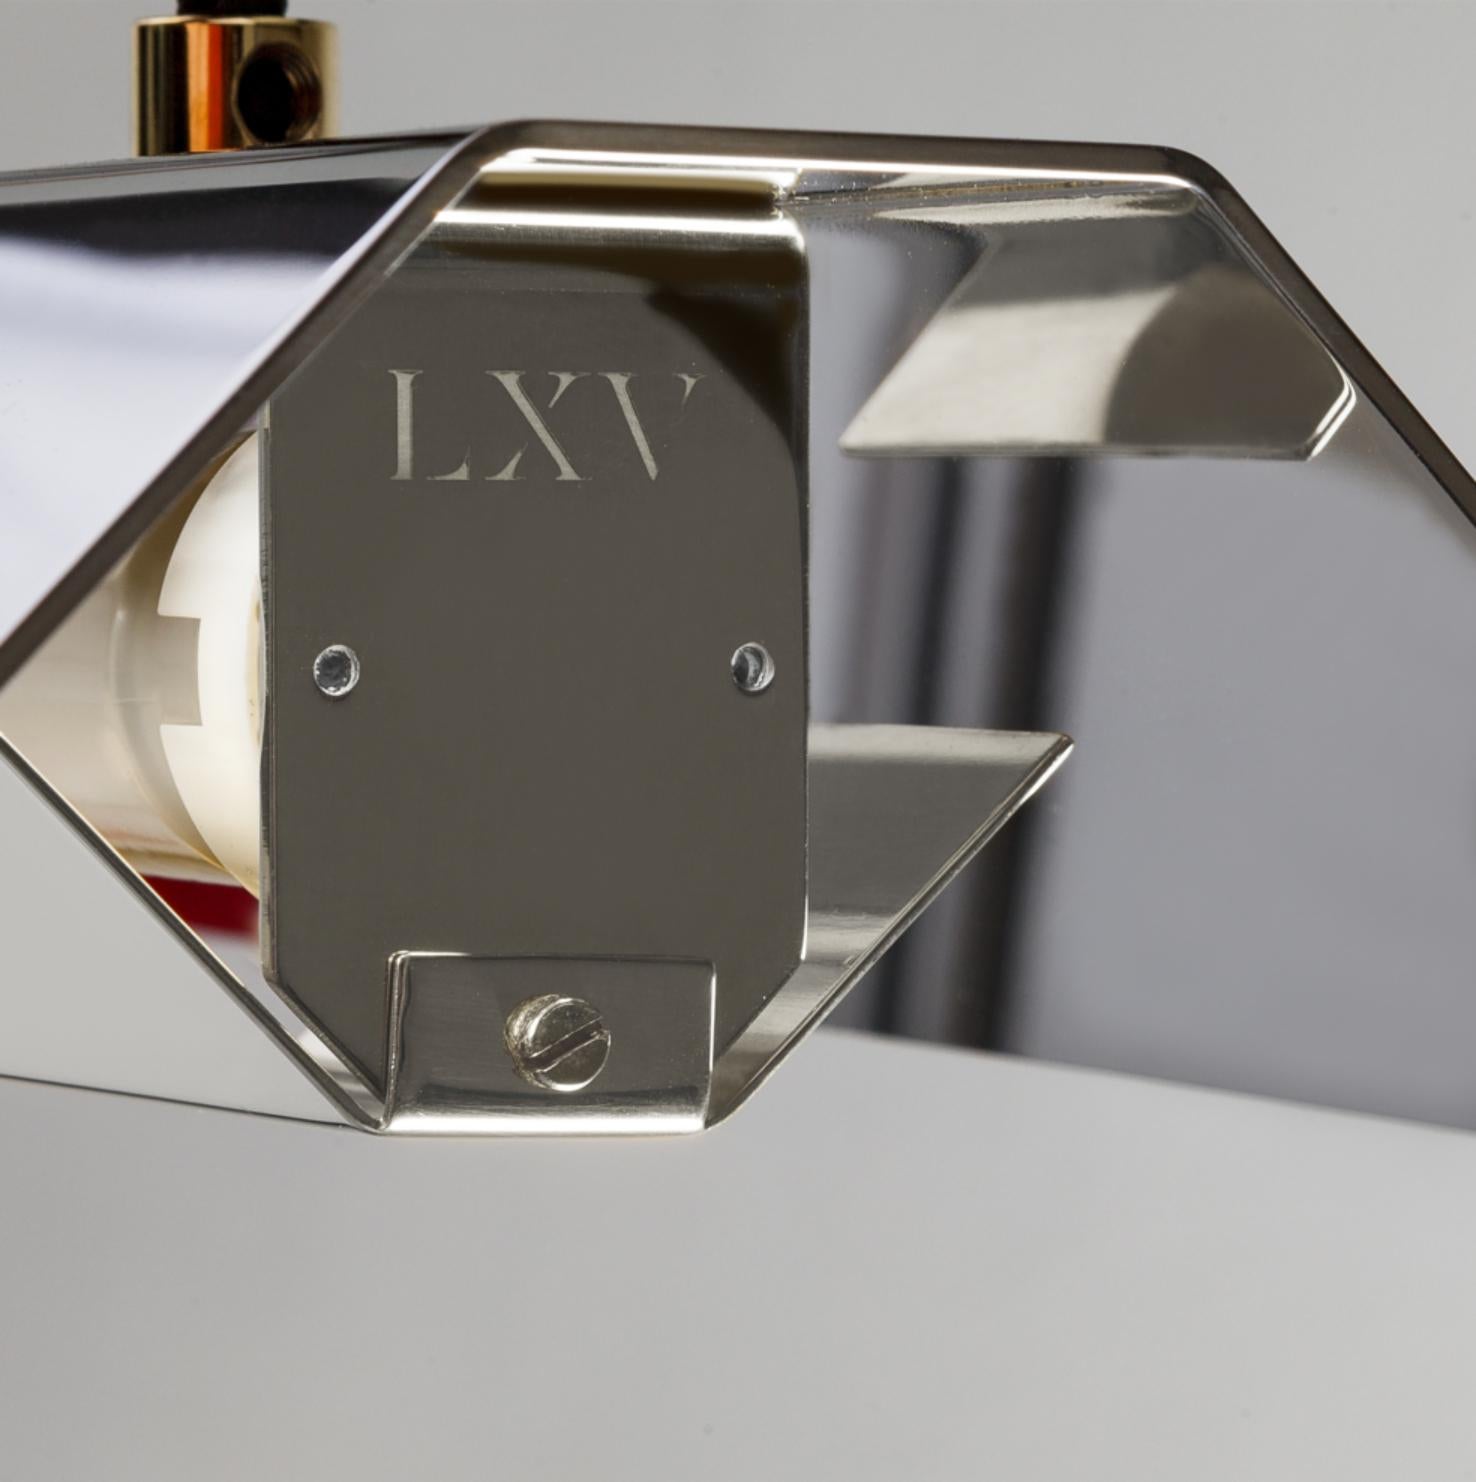 Extra large Misalliance inox suspended light by Lexavala
Dimensions: D 16 x W 160 x H 8 cm
Materials: Stainless steel.

There are two lenghts of socket covers, extending over the LED. Two short are to be found in Suspended and Surface, and one